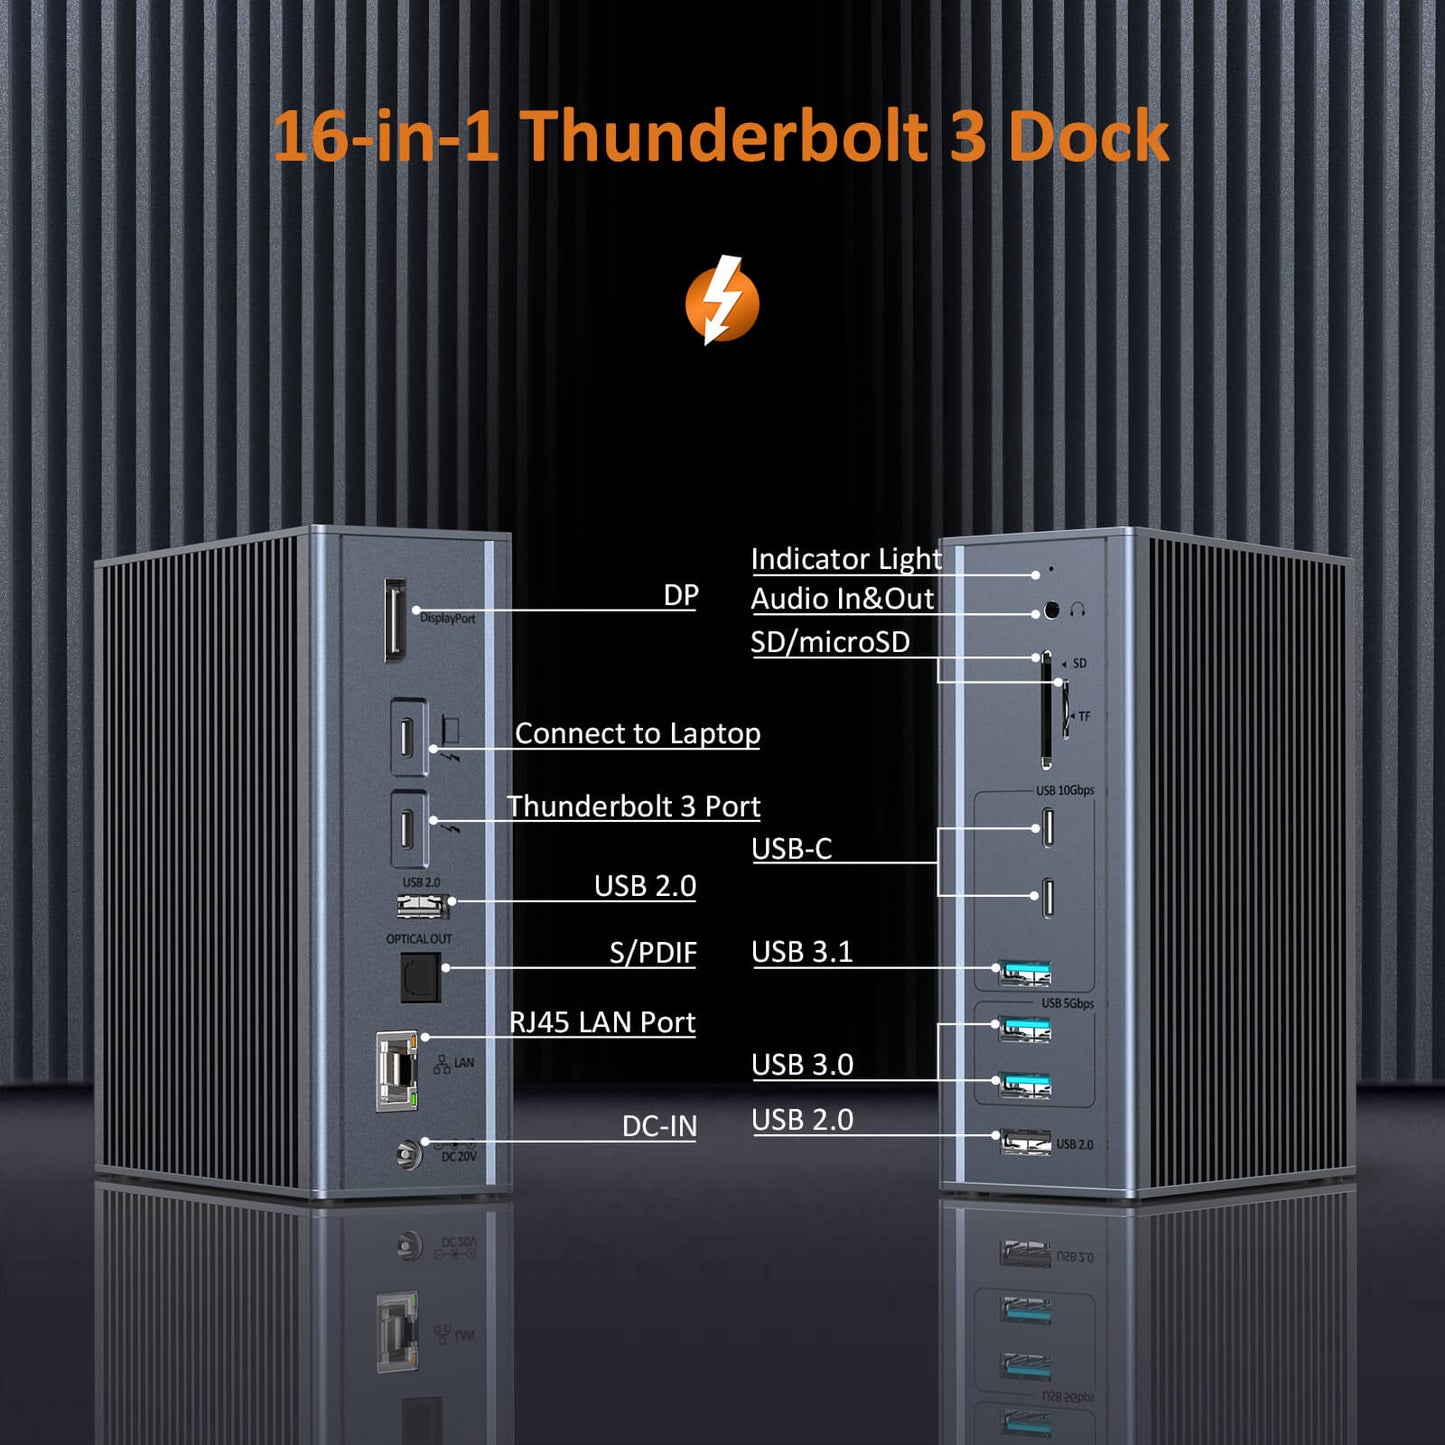 UDS017T 16-in 1 Thunderbolt 3 Docking Station Specifications